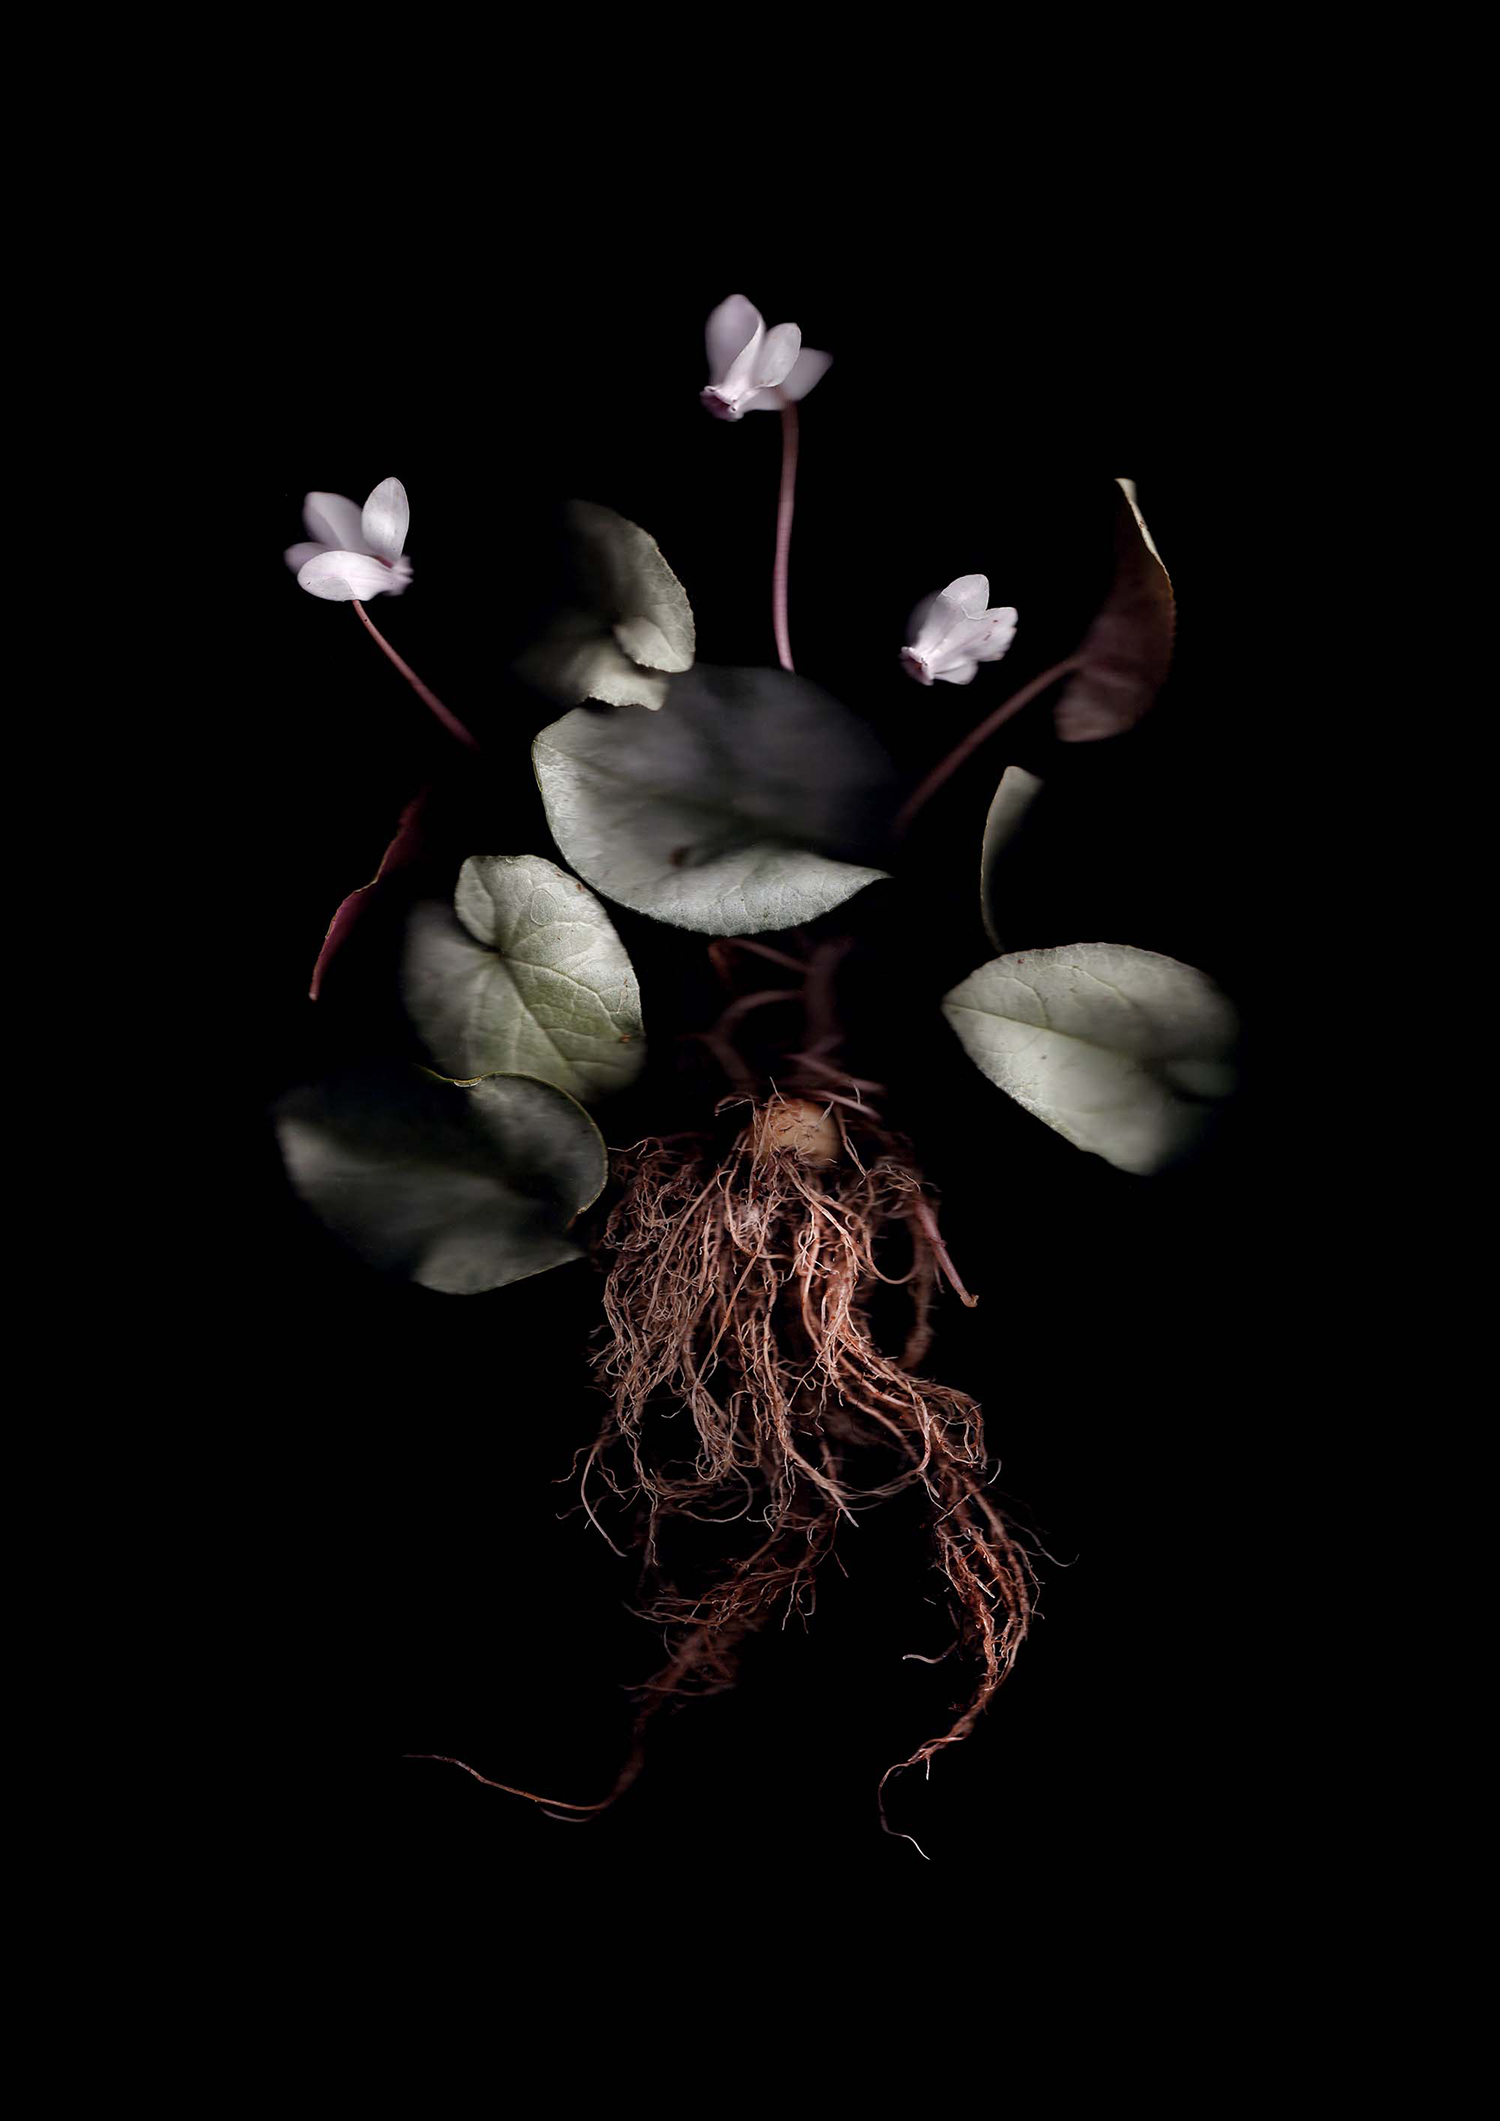 Photograph of a cyclamen, showing the full plant with the roots, on a black background